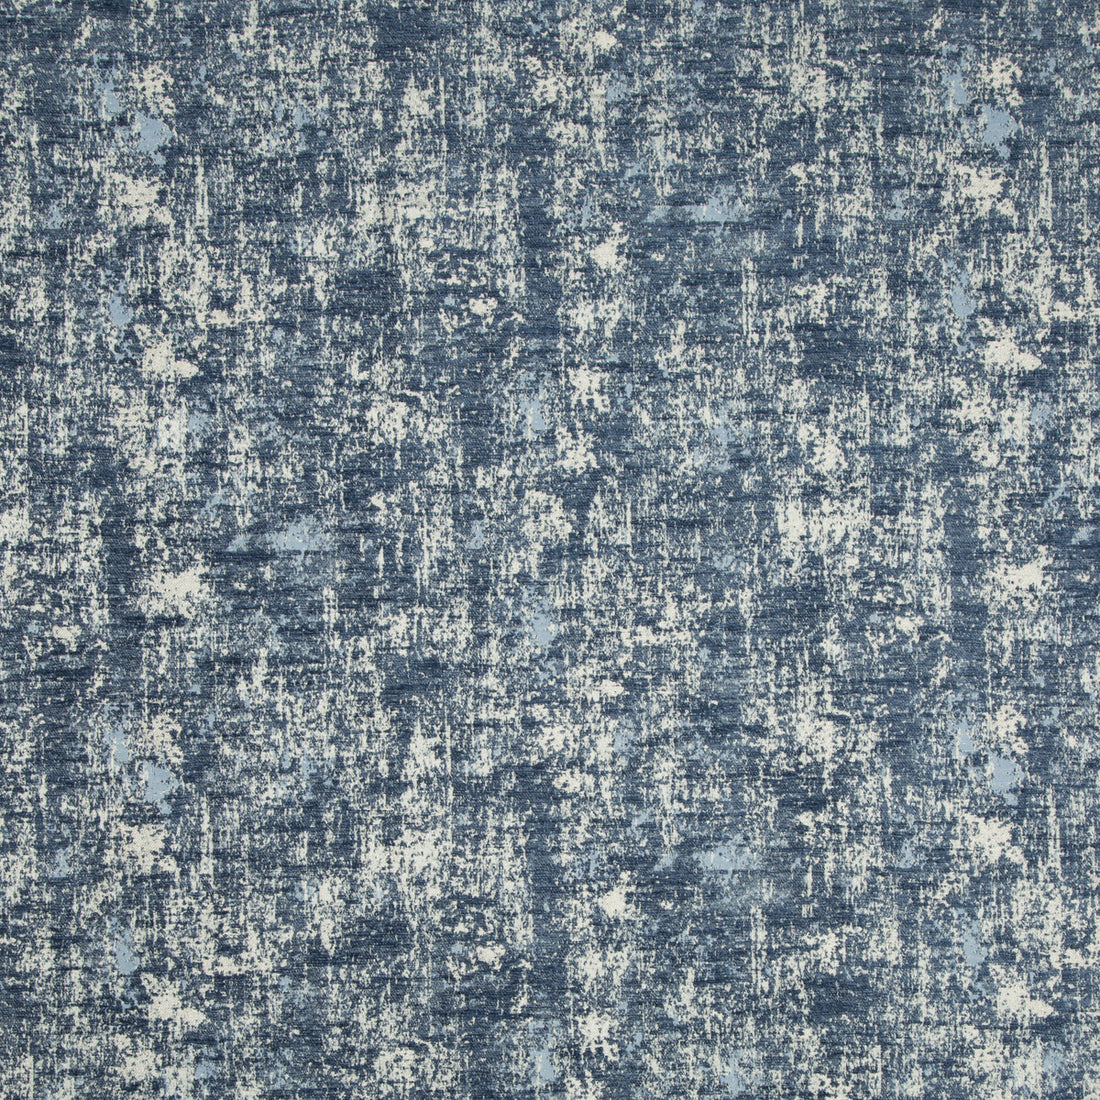 Les Ecorces Woven fabric in blue color - pattern 8017130.5.0 - by Brunschwig &amp; Fils in the Les Ensembliers collection